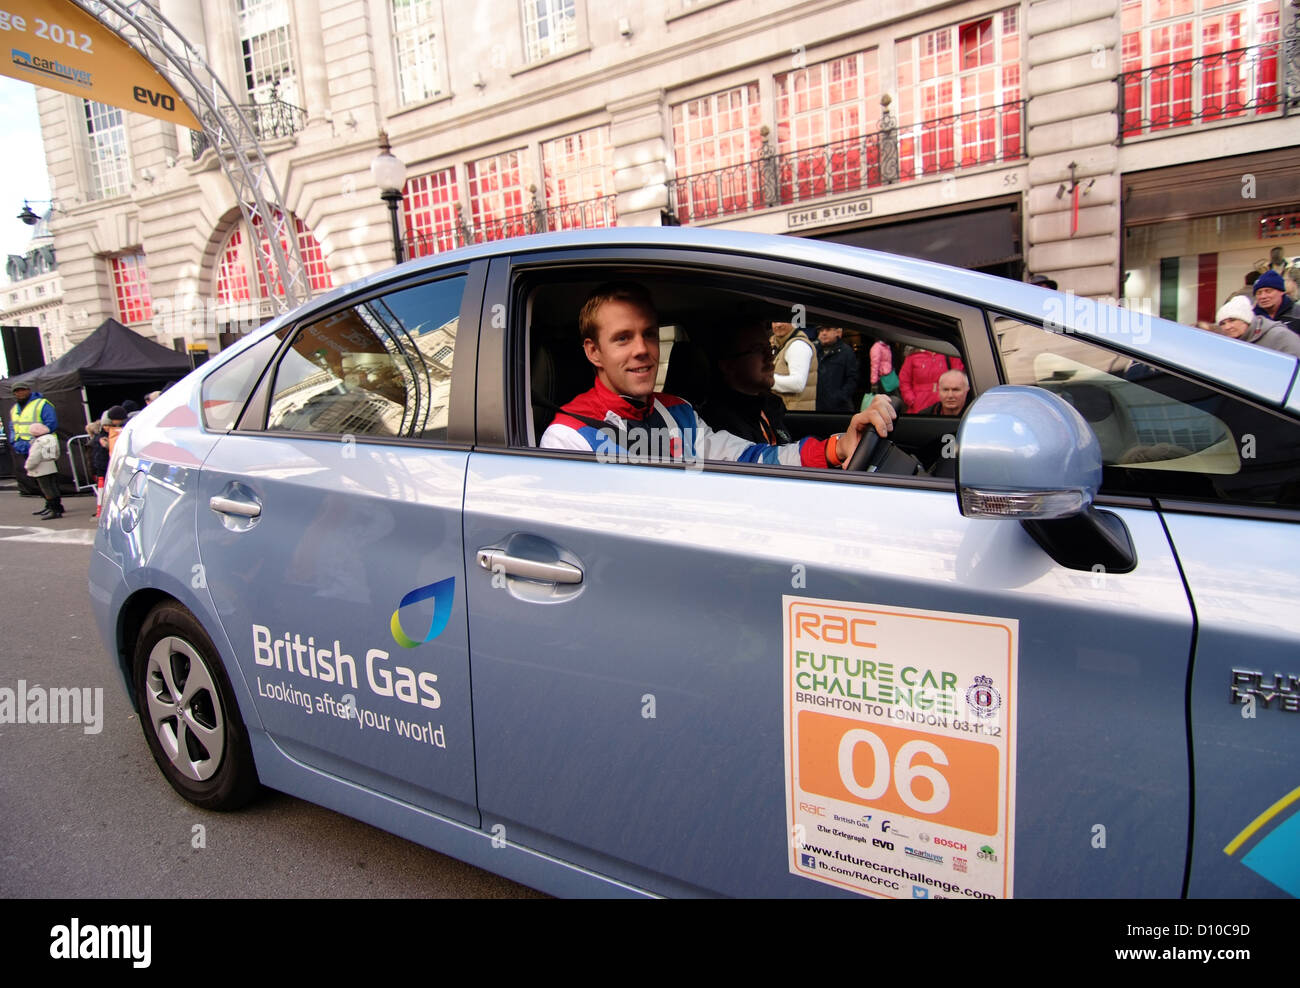 Team GB British swimmer Ross Davenport in London's Regent Street after taking part in the Rac Future Car Challenge Stock Photo